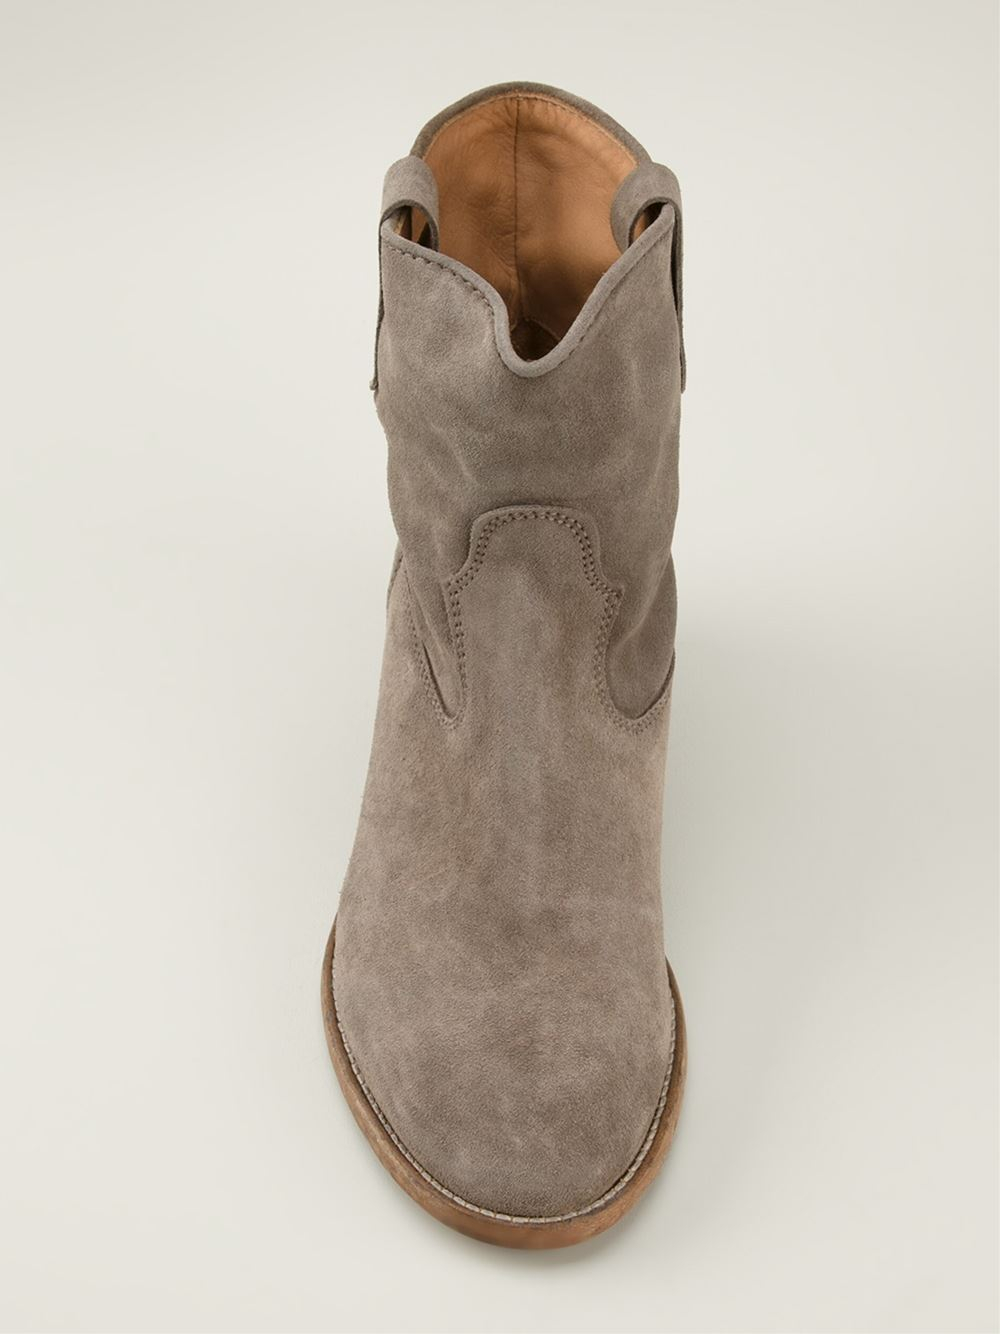 Marant 'Crisi' Boots in Grey (Gray) - Lyst